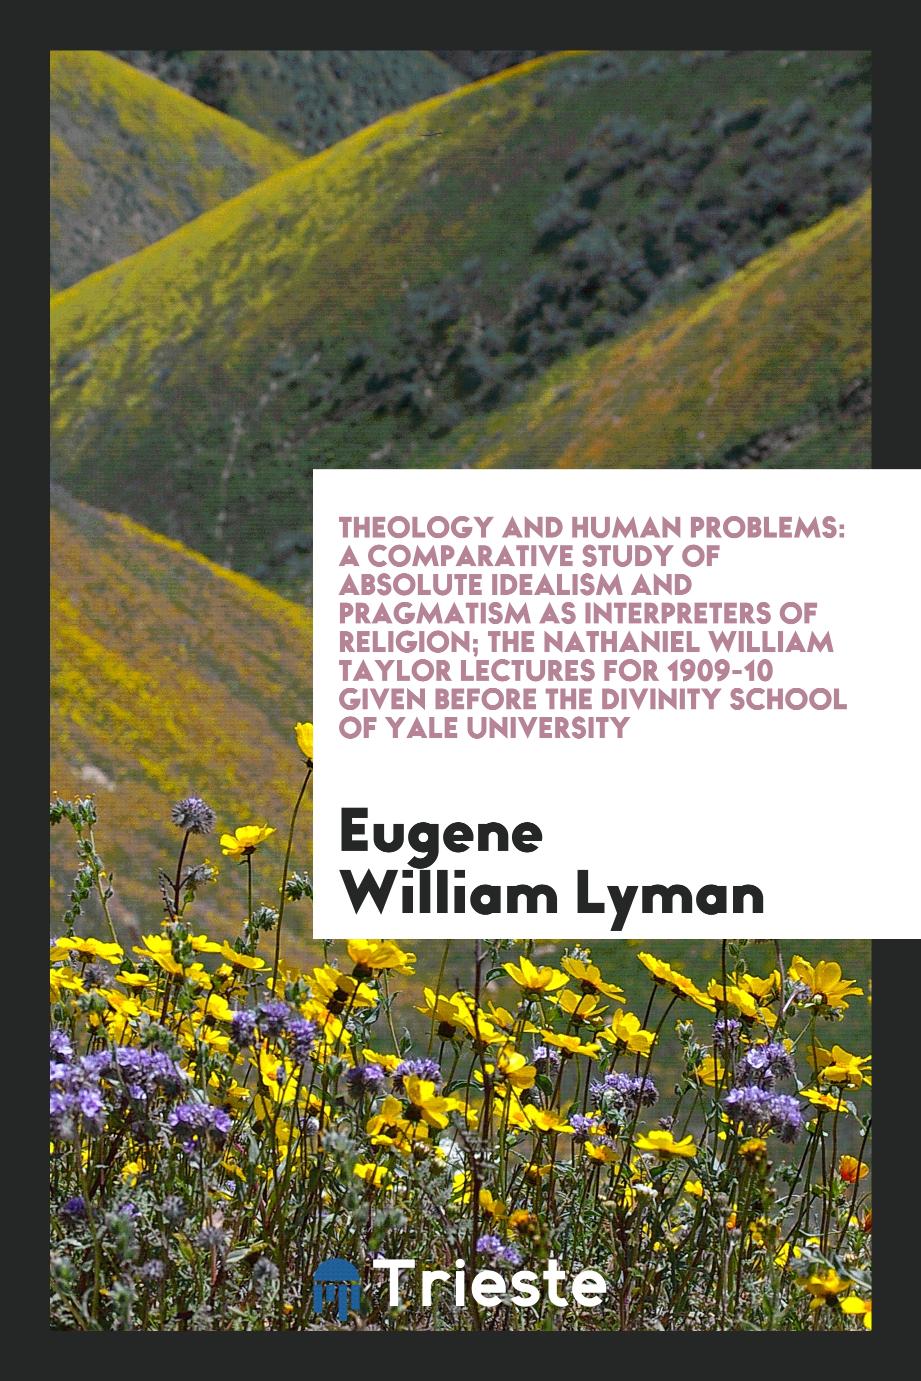 Theology and human problems: a comparative study of absolute idealism and pragmatism as interpreters of religion; The Nathaniel William Taylor lectures for 1909-10 given before the Divinity School of Yale University